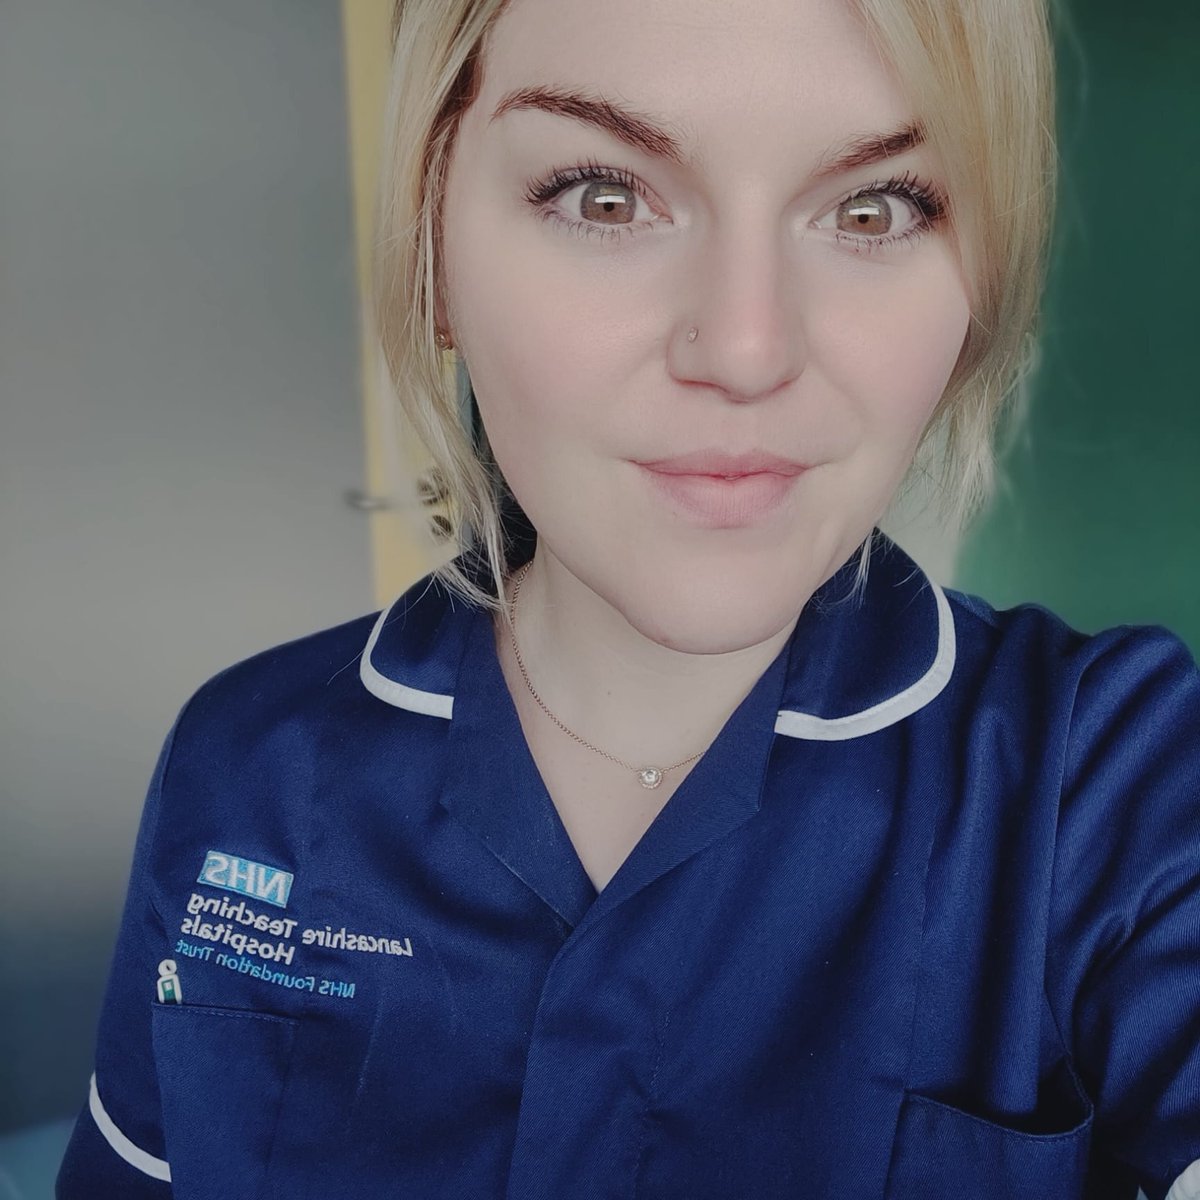 🌟New starter🌟
Hi, im Searne, & I'm the new ward manager on MAU CDH.I'll be working alongside Hayley and the team.I have 8 years of experience in acute medicine & ED.I'm really excited about the new learning opportunities and have loads of ideas for service improvement.
#teammau